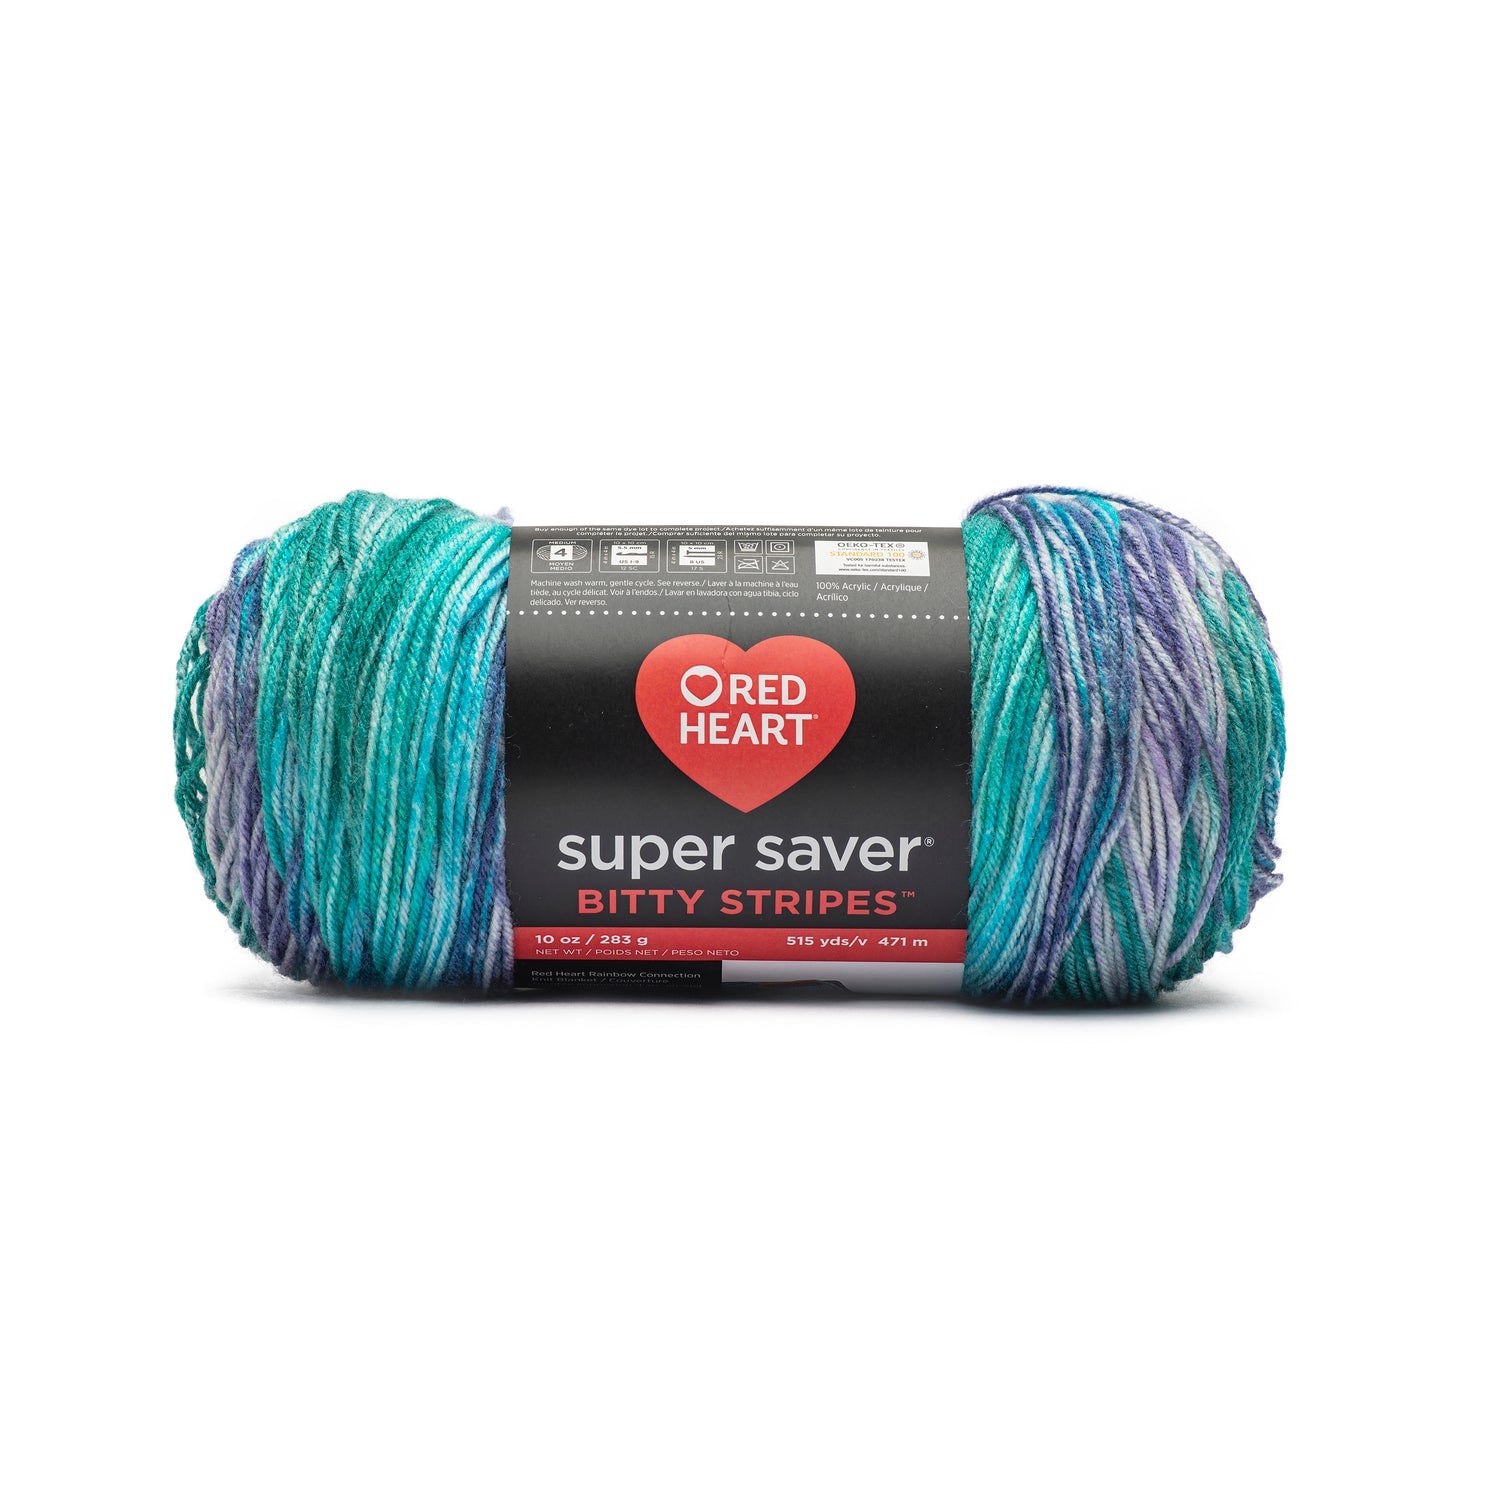 Red Heart Super Saver Bitty Stripes Yarn - Discontinued shades